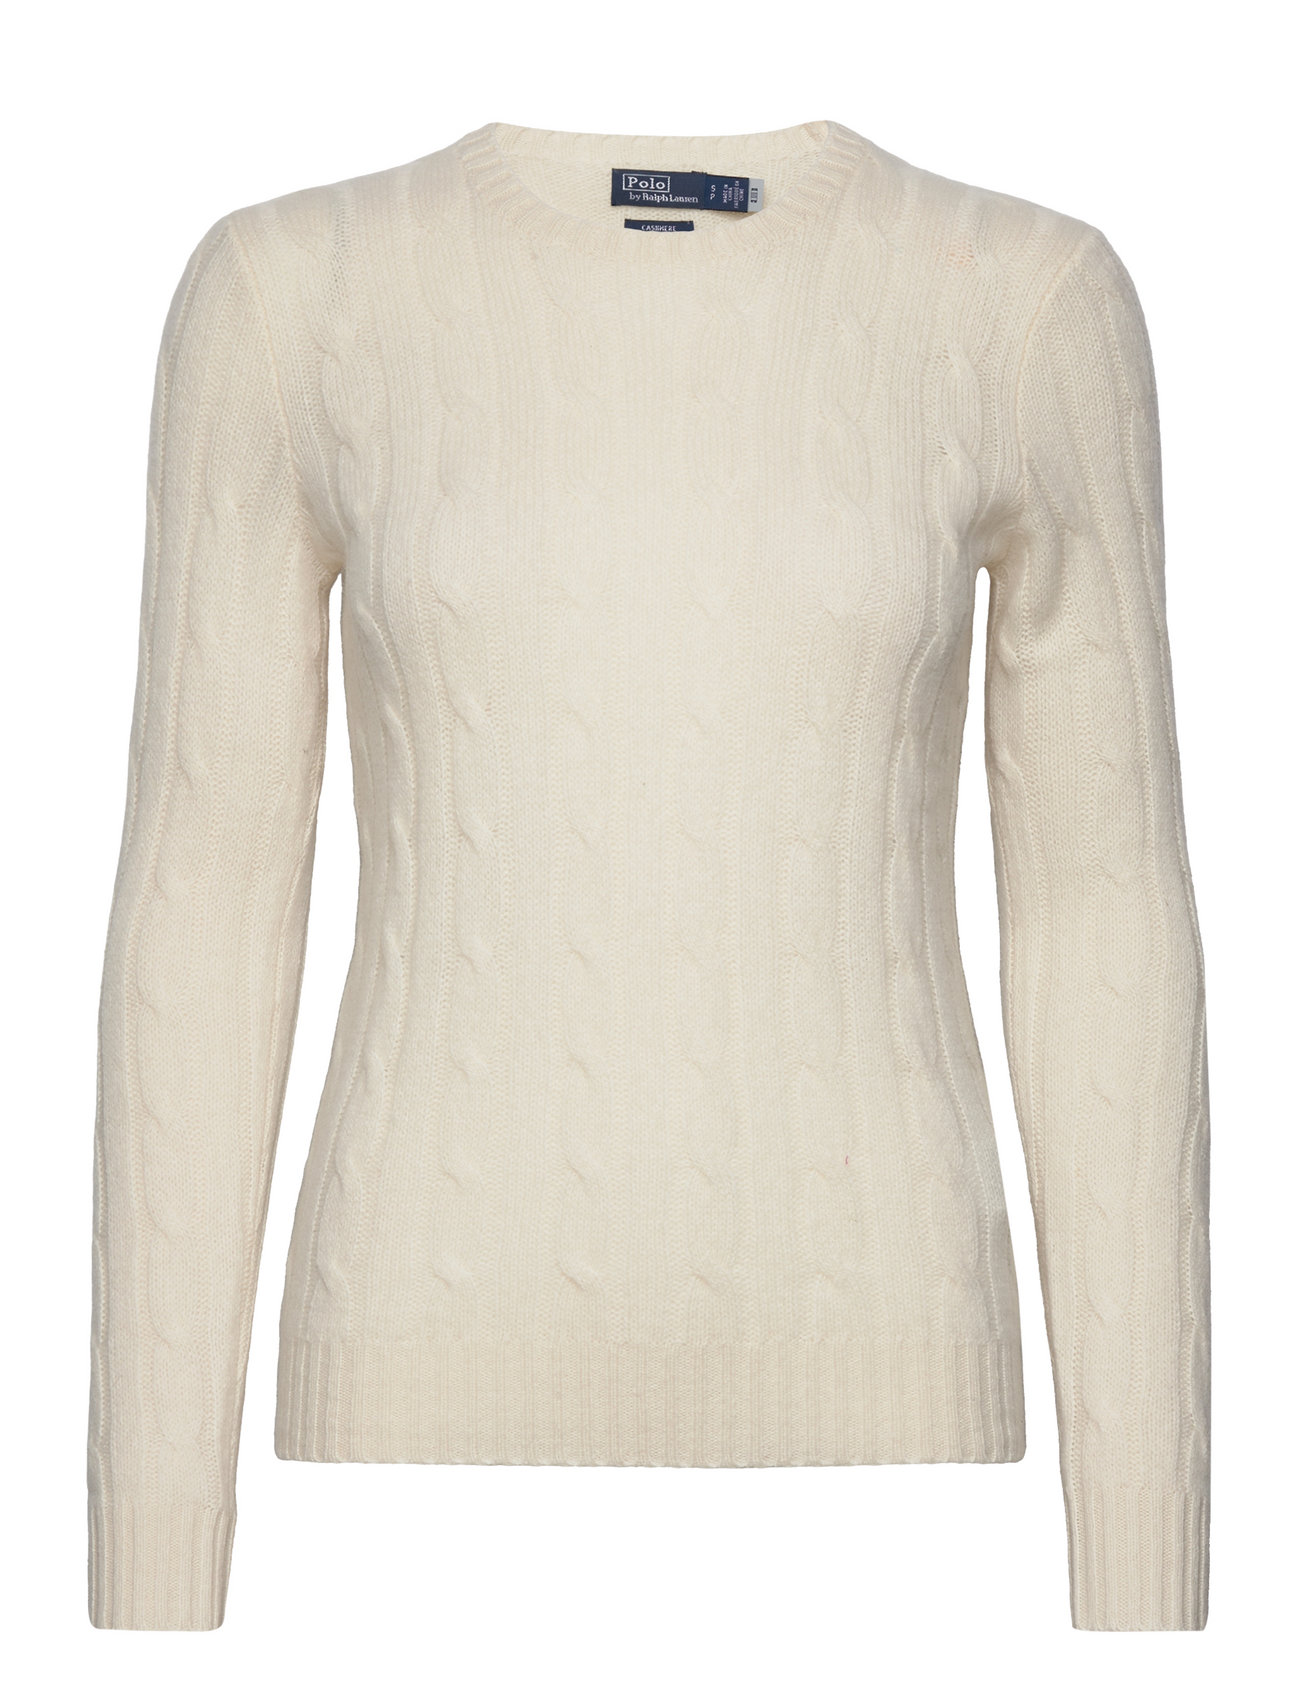 Cable-Knit Cashmere Sweater Tops Knitwear Jumpers Cream Polo Ralph Lauren